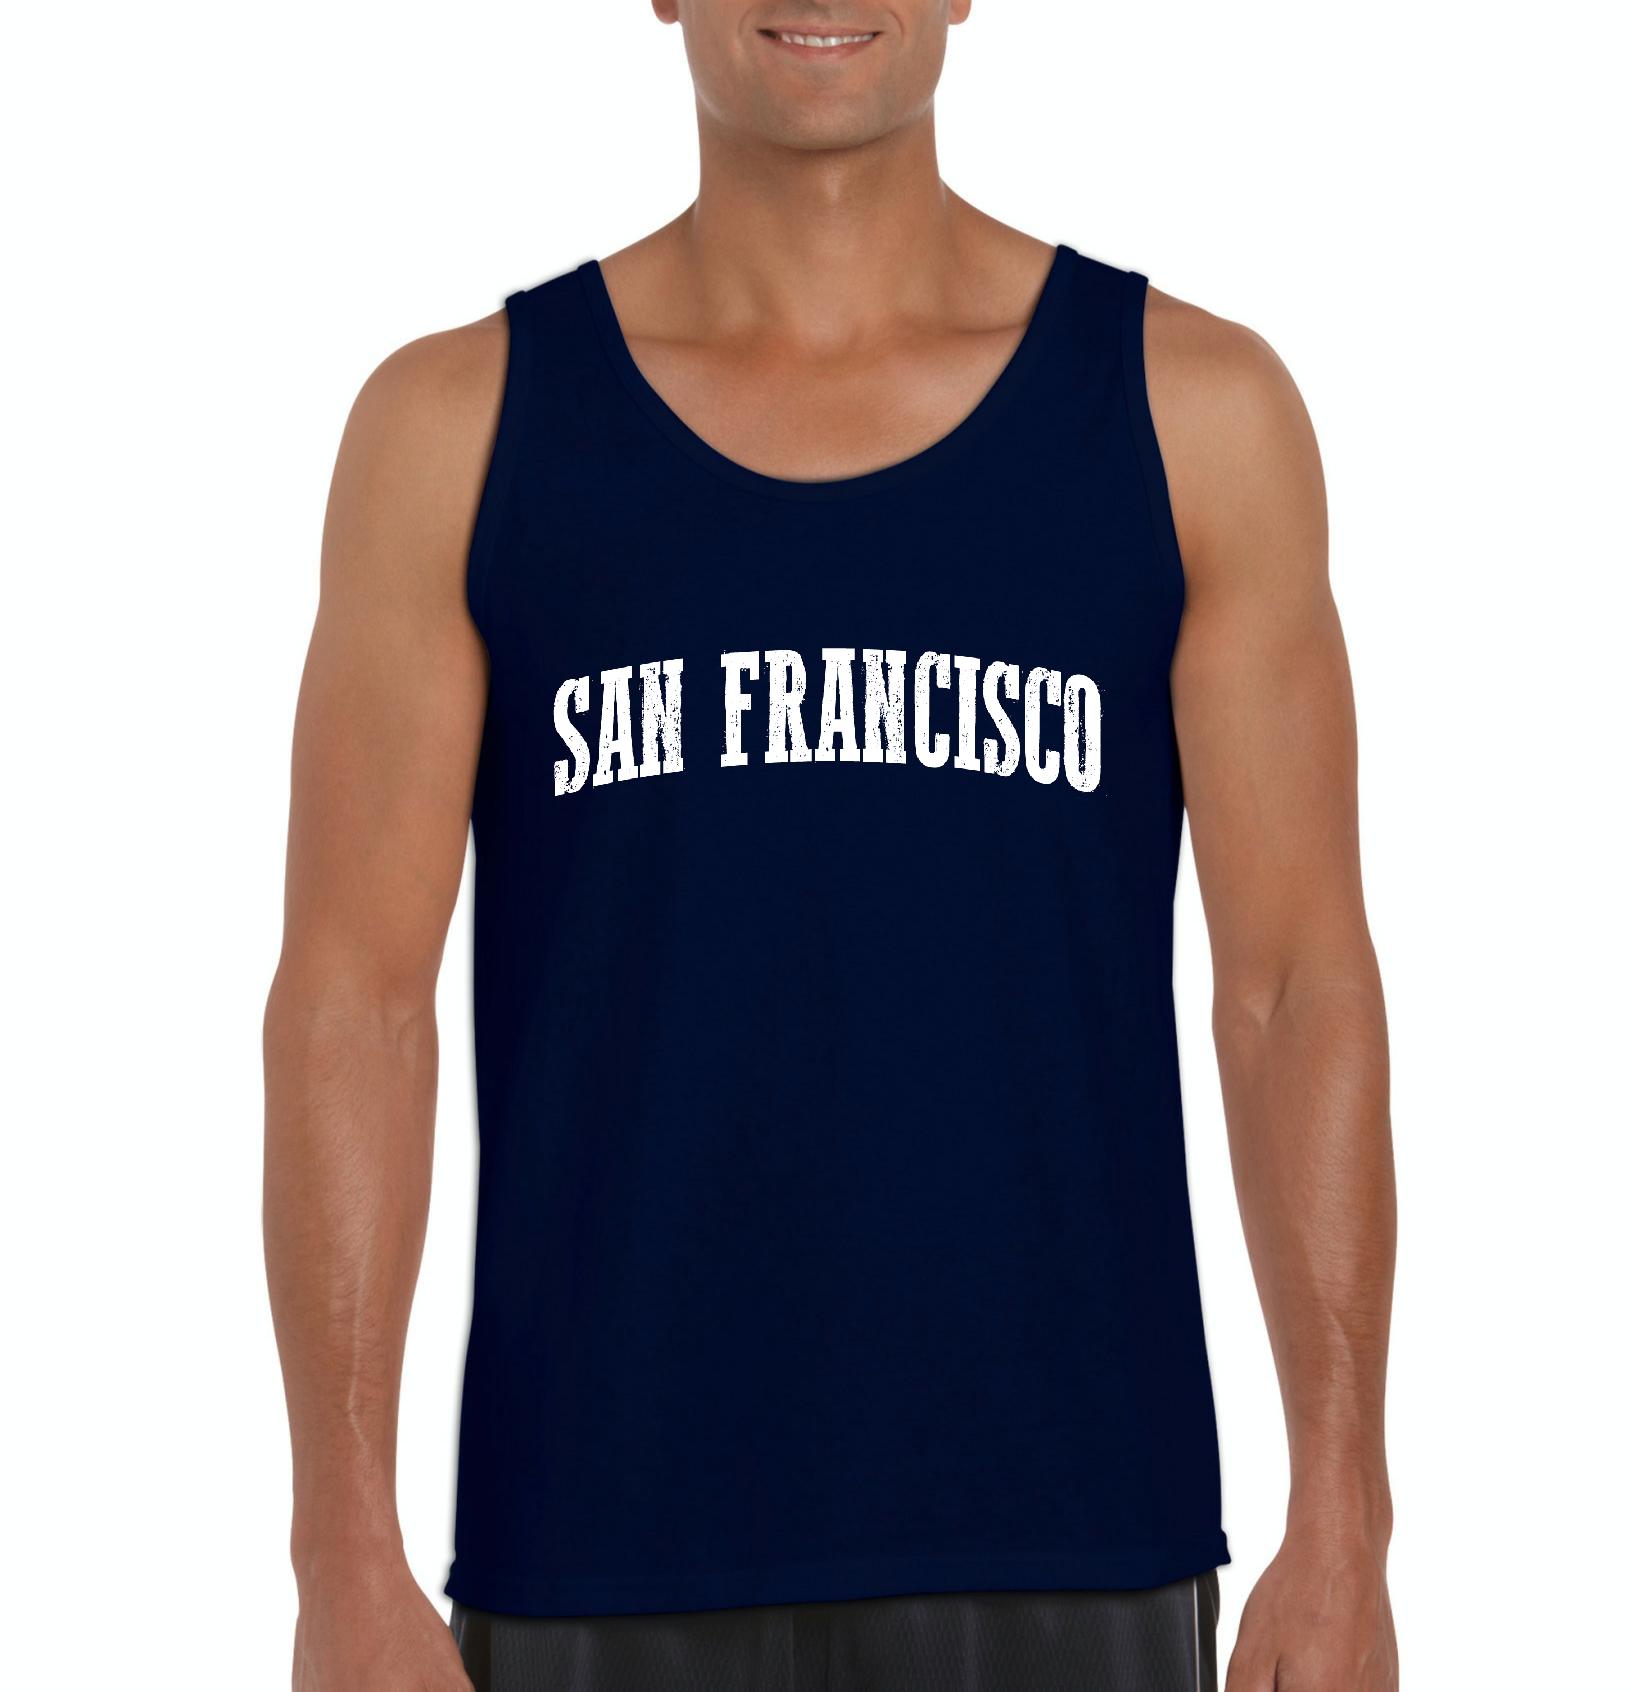 Normal is Boring - Men's Tank Top for Men, up to Men Size 3XL - San Francisco - image 1 of 5